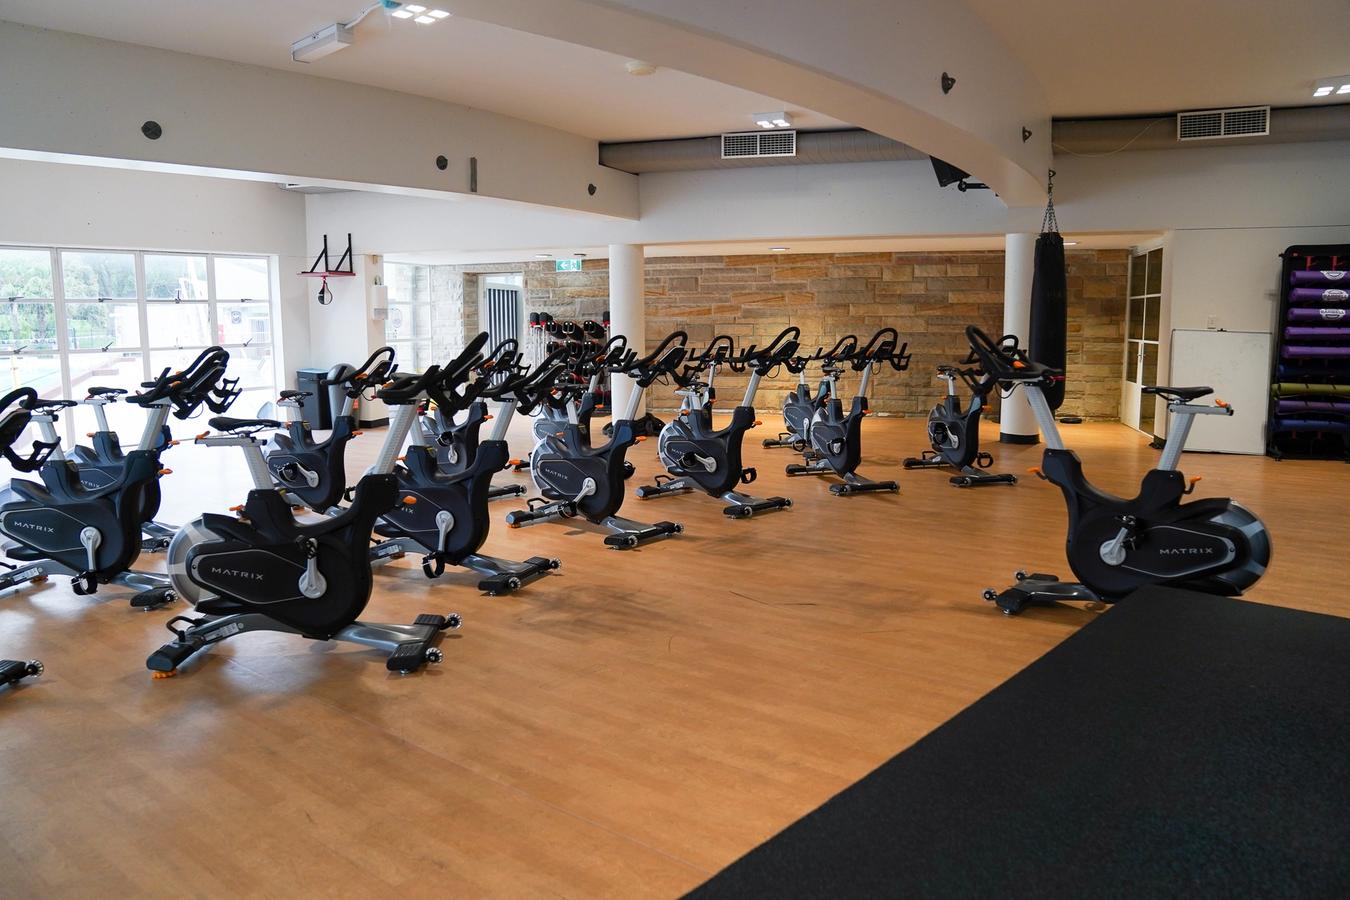 Stationary bikes set-up for a spin class